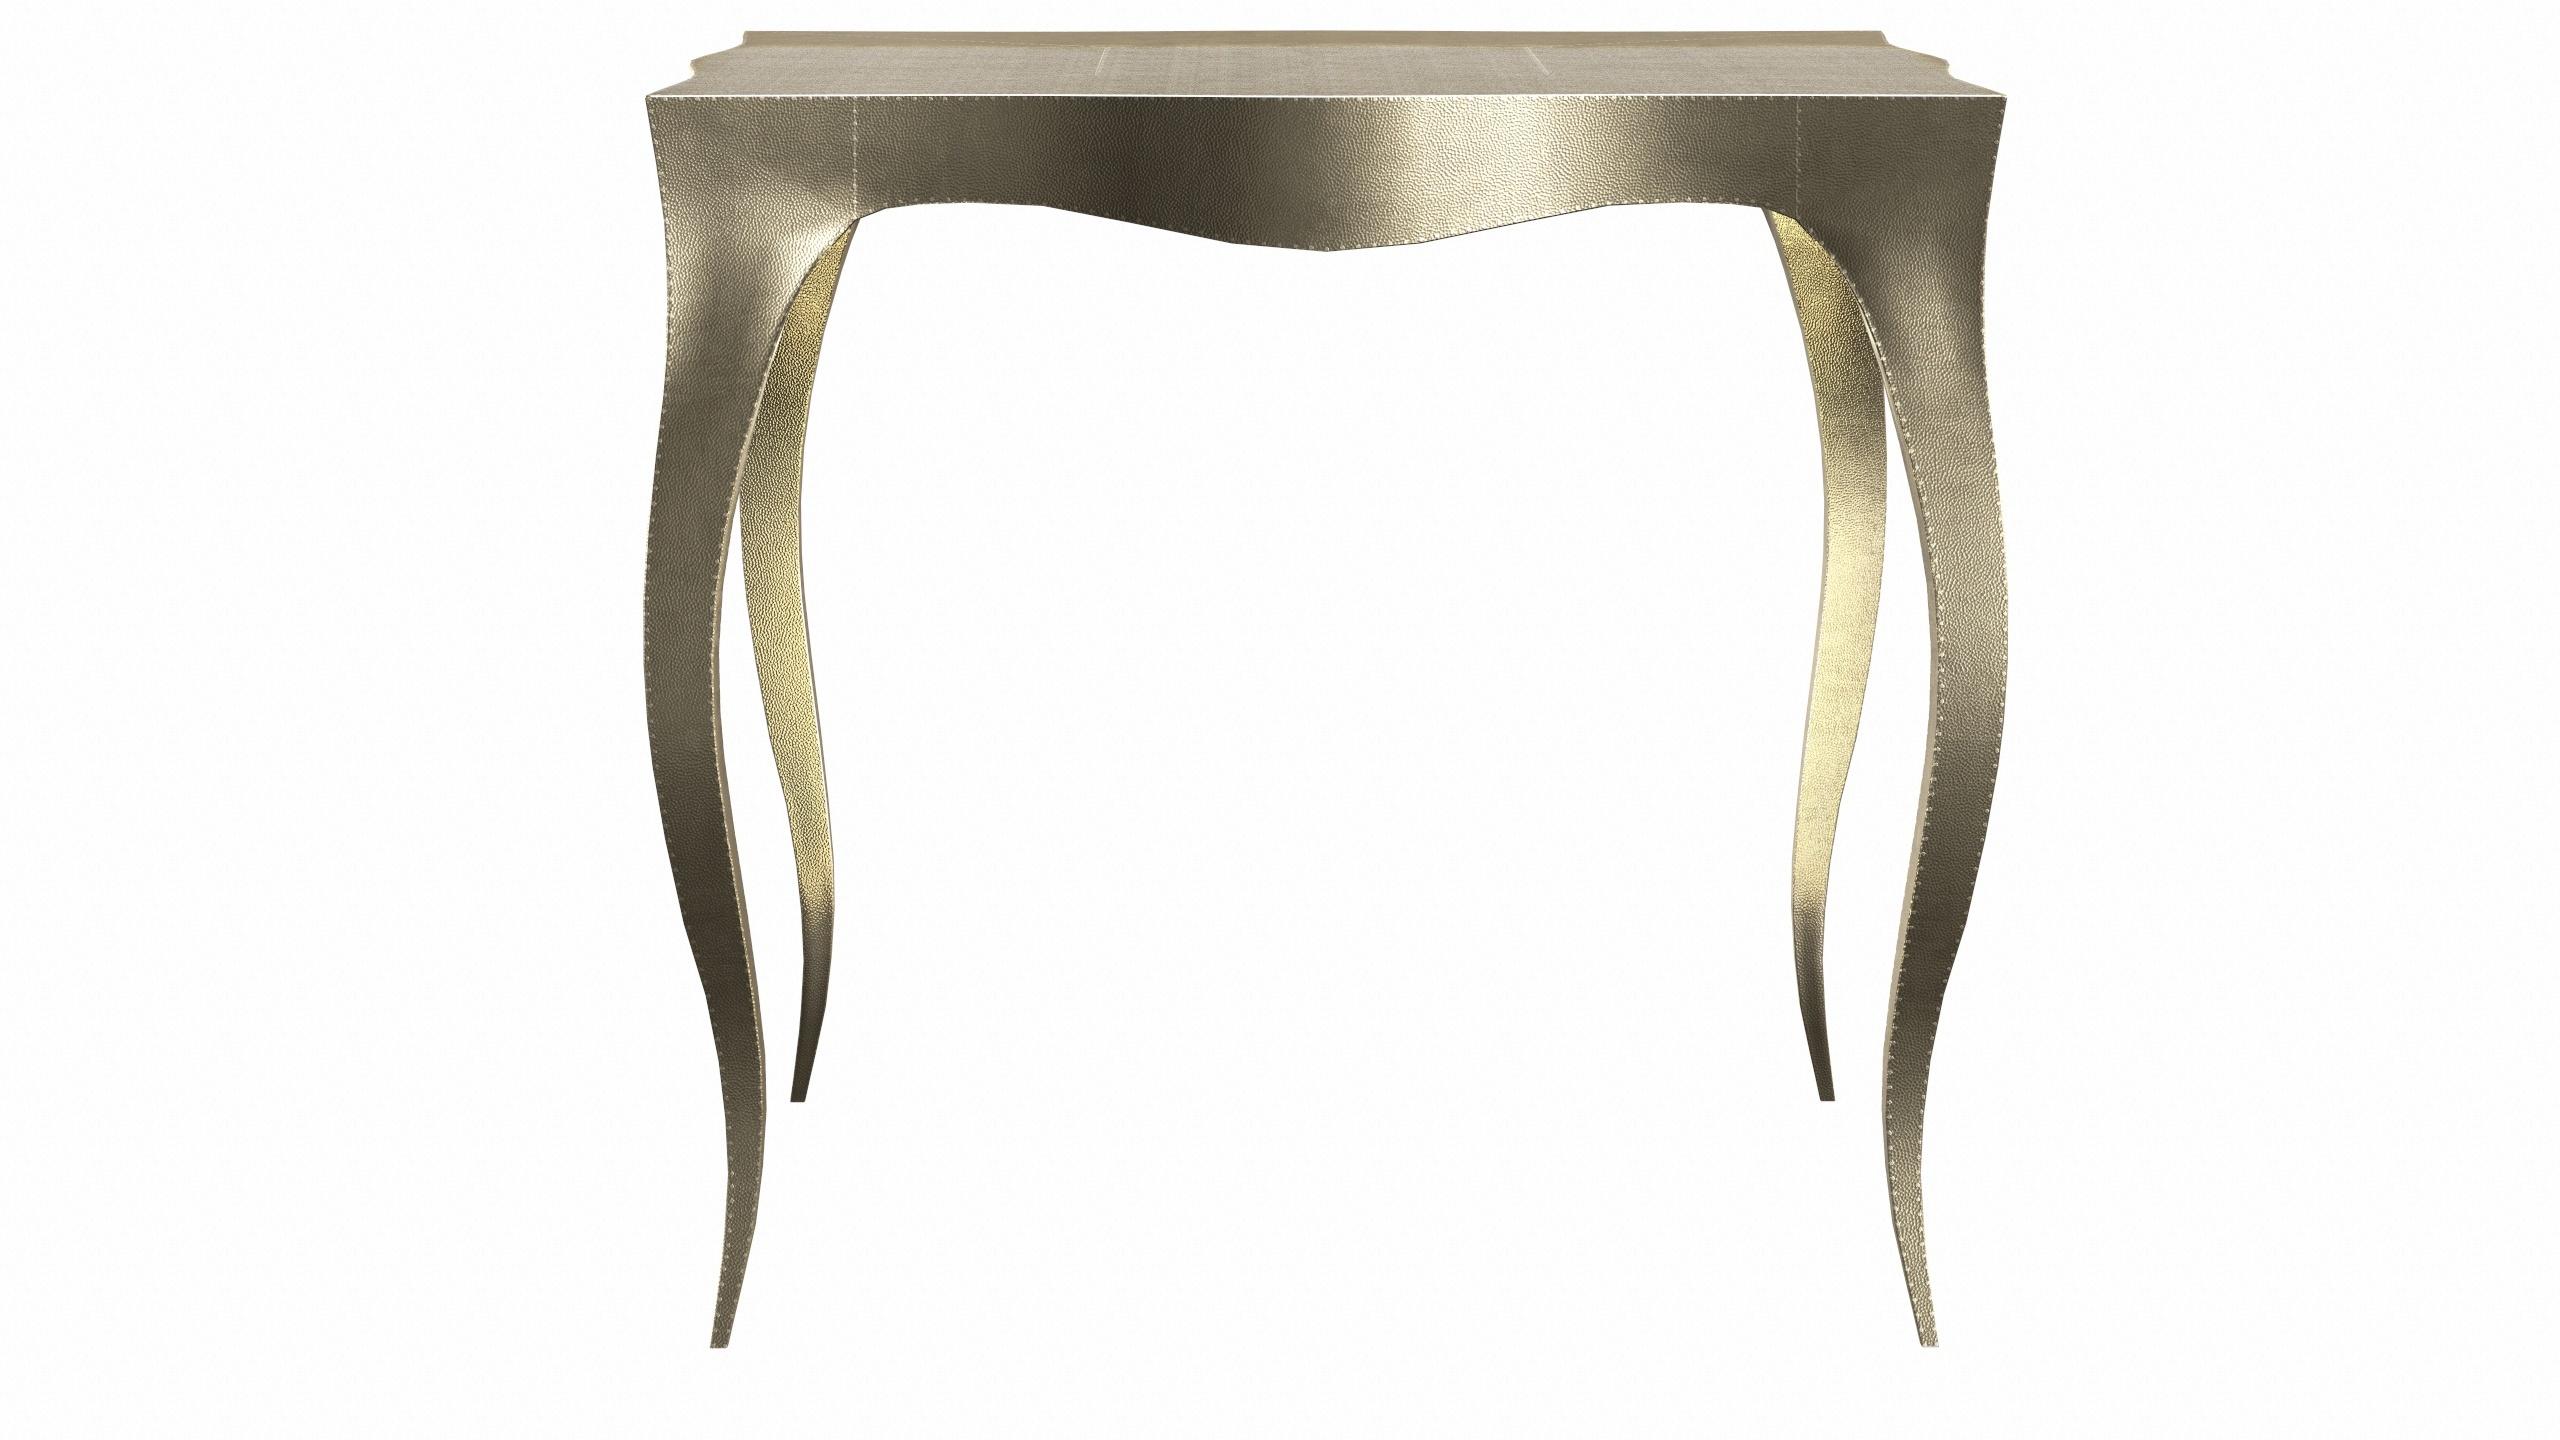 Louise Art Deco Nesting and Stacking Tables Mid. Hammered Brass by Paul Mathieu For Sale 1